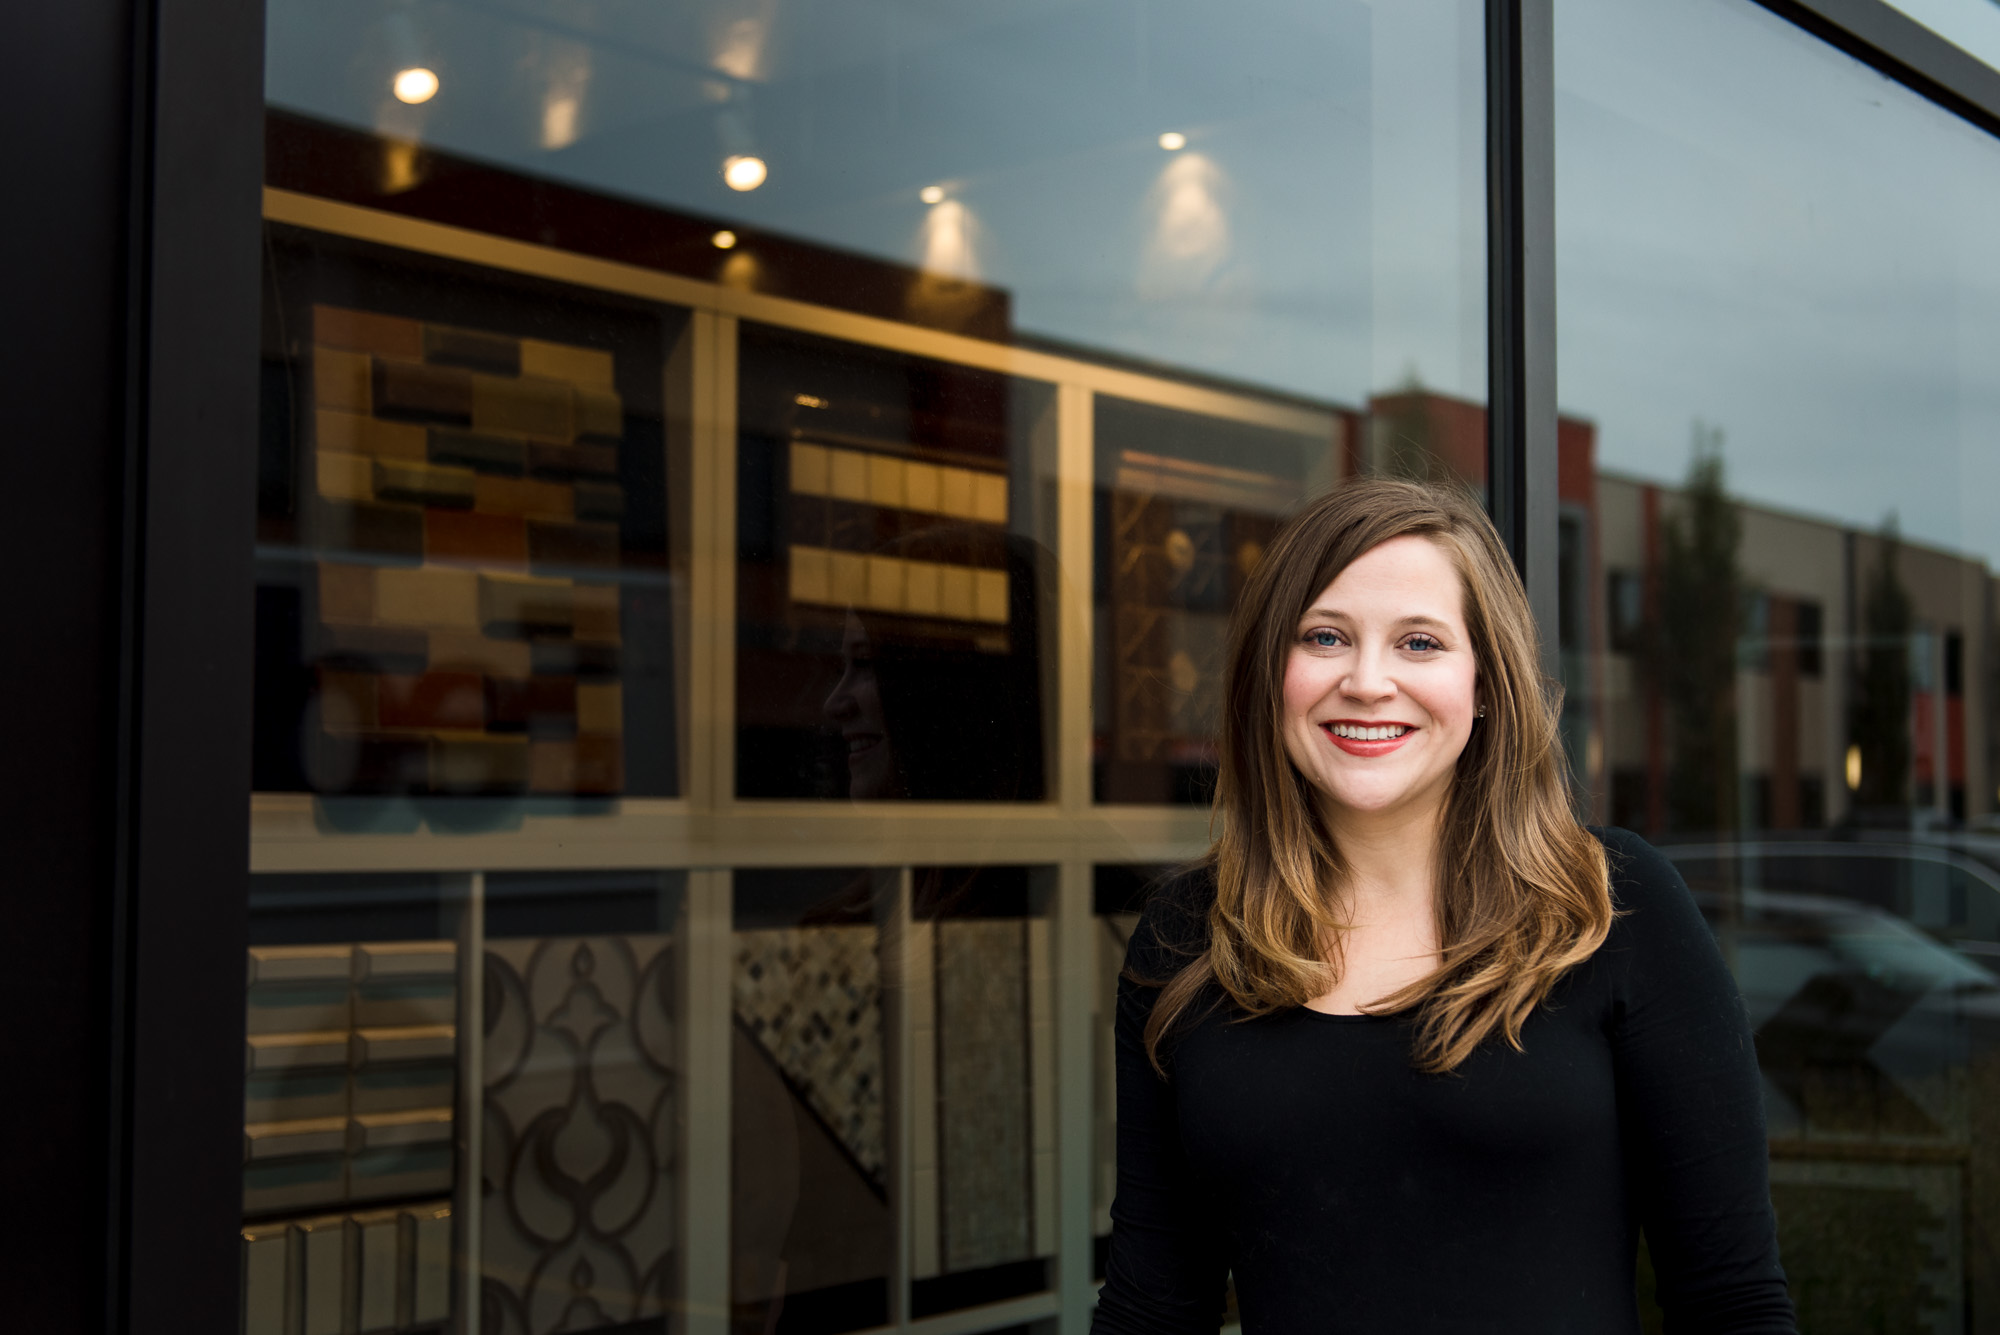 Chelsea Brown, owner of River City Tile Company in Edmonton